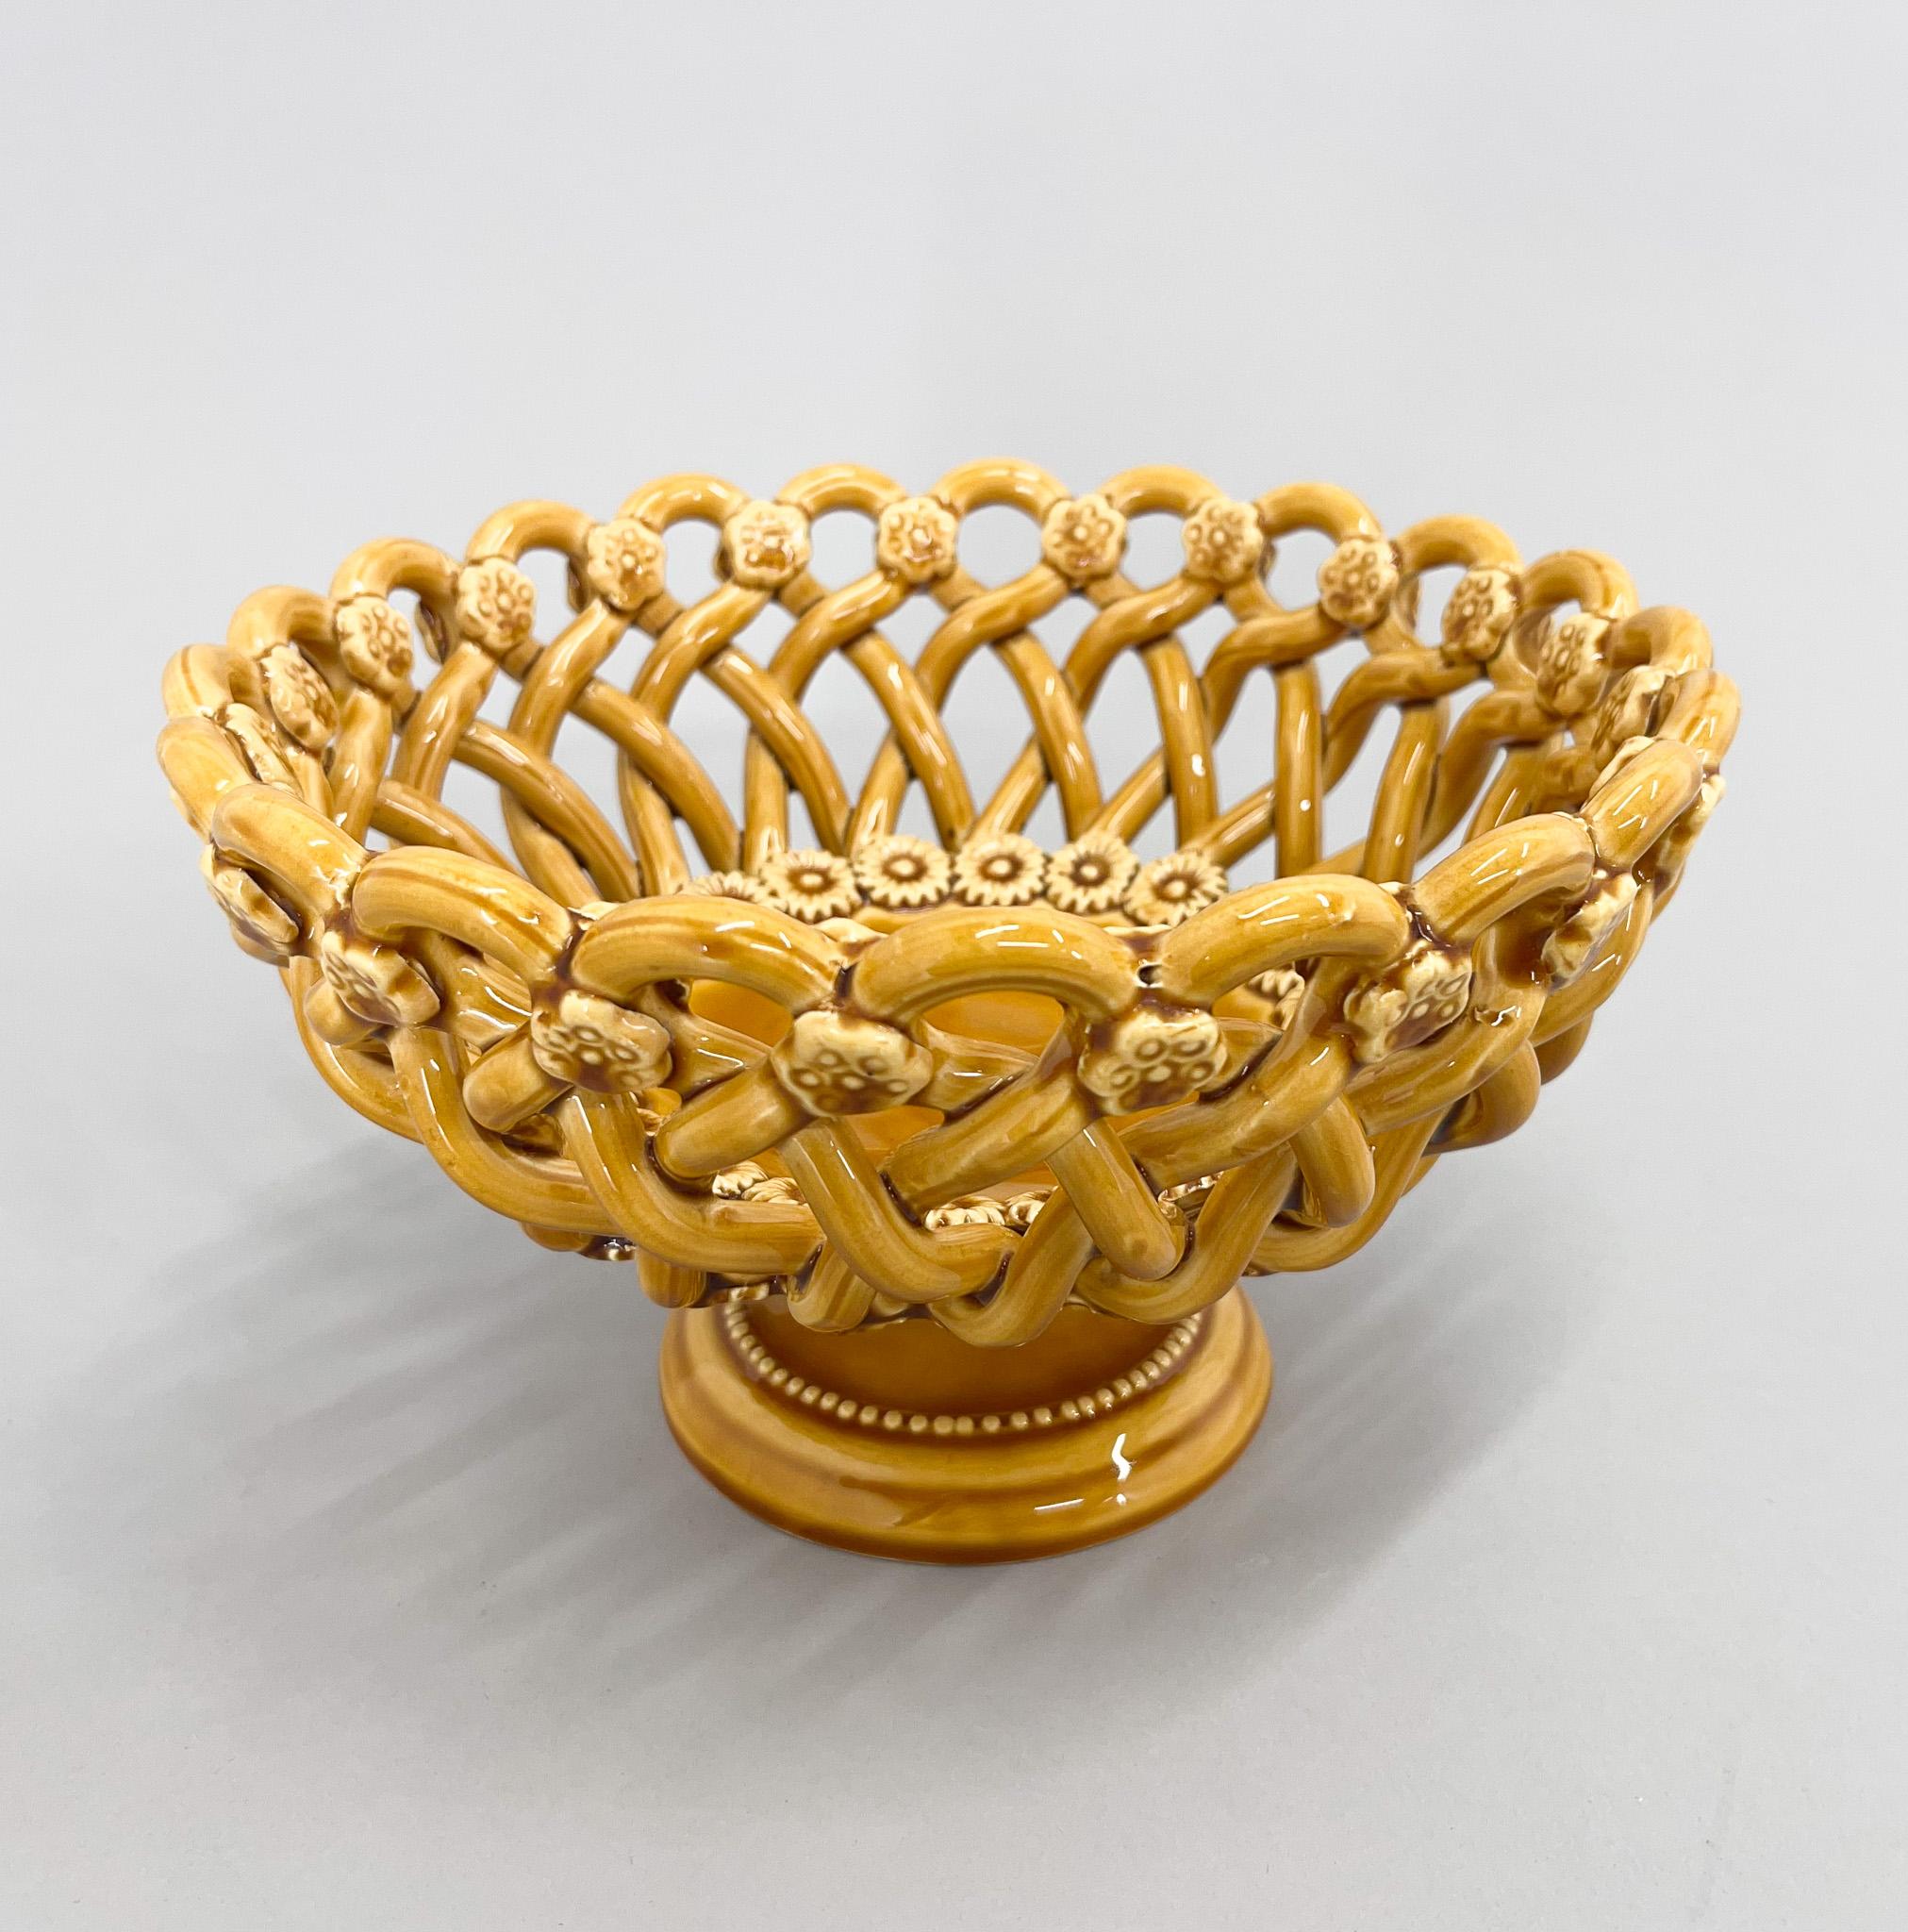 A beautiful French 1960's faience woven ceramic bowl, handcrafted with braided design intense typical of ceramic artist Pichon’s work executed in mixed earth clays. Signed. Pichon á Uzes is a family-run ceramics factory located in the town of Uzes